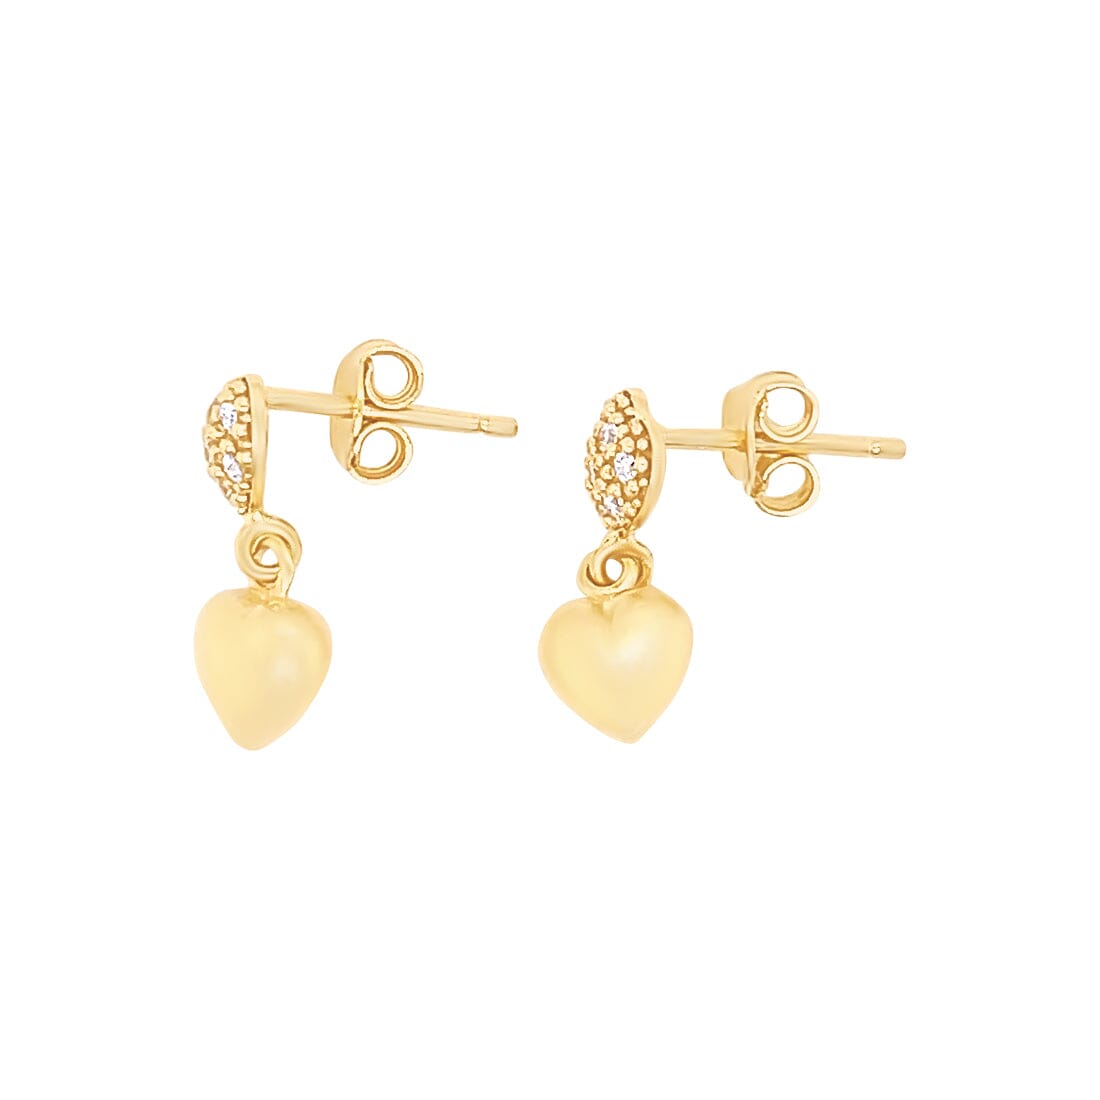 9ct Yellow Gold Silver Infused Heart Drop Stud Earrings with Cubic Zirconia Earrings Bevilles 